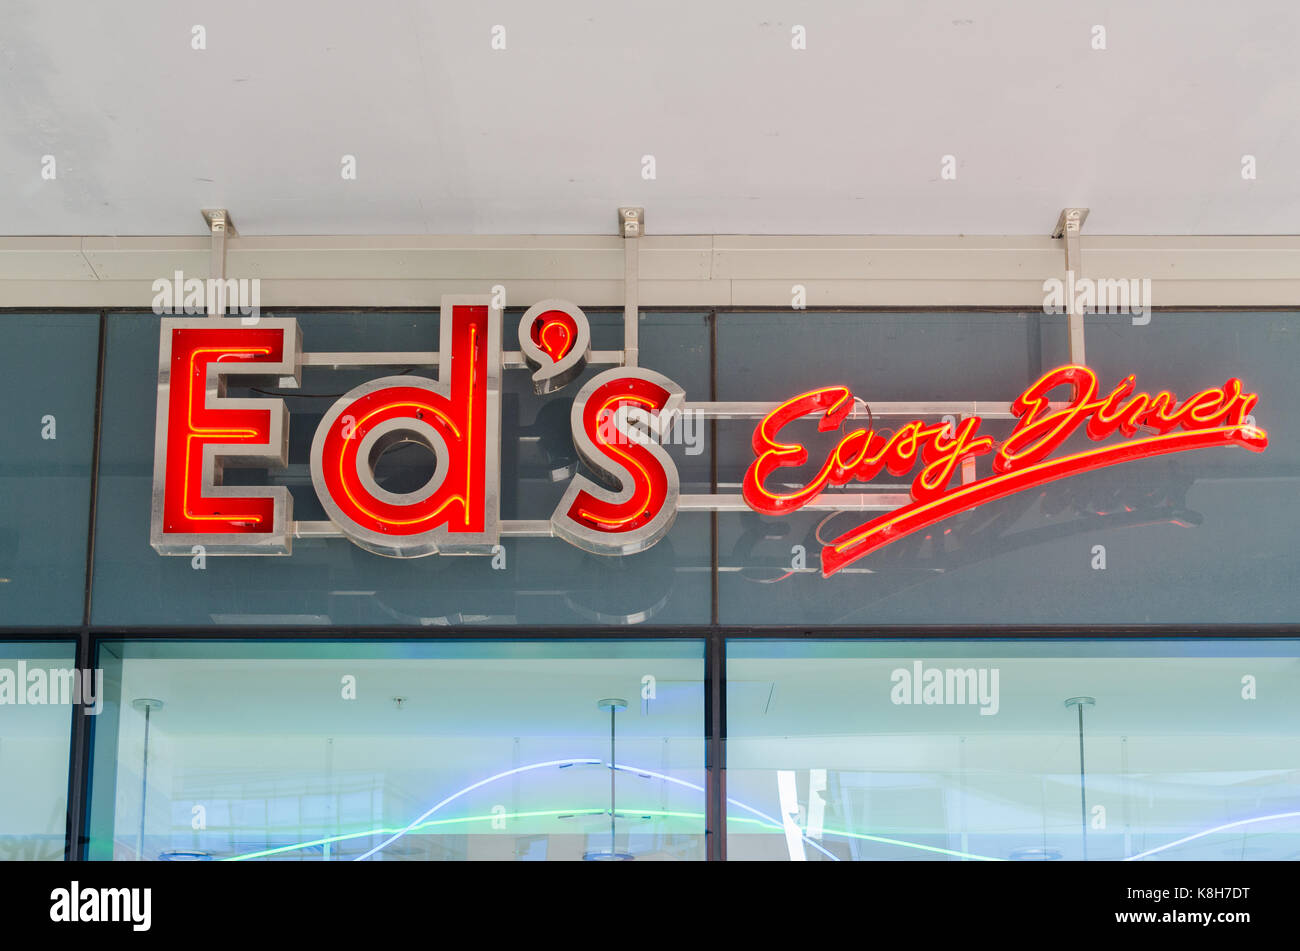 Neon sign for Ed's Easy Diner burger restaurant at the Barclaycard Arena in Birmingham Stock Photo